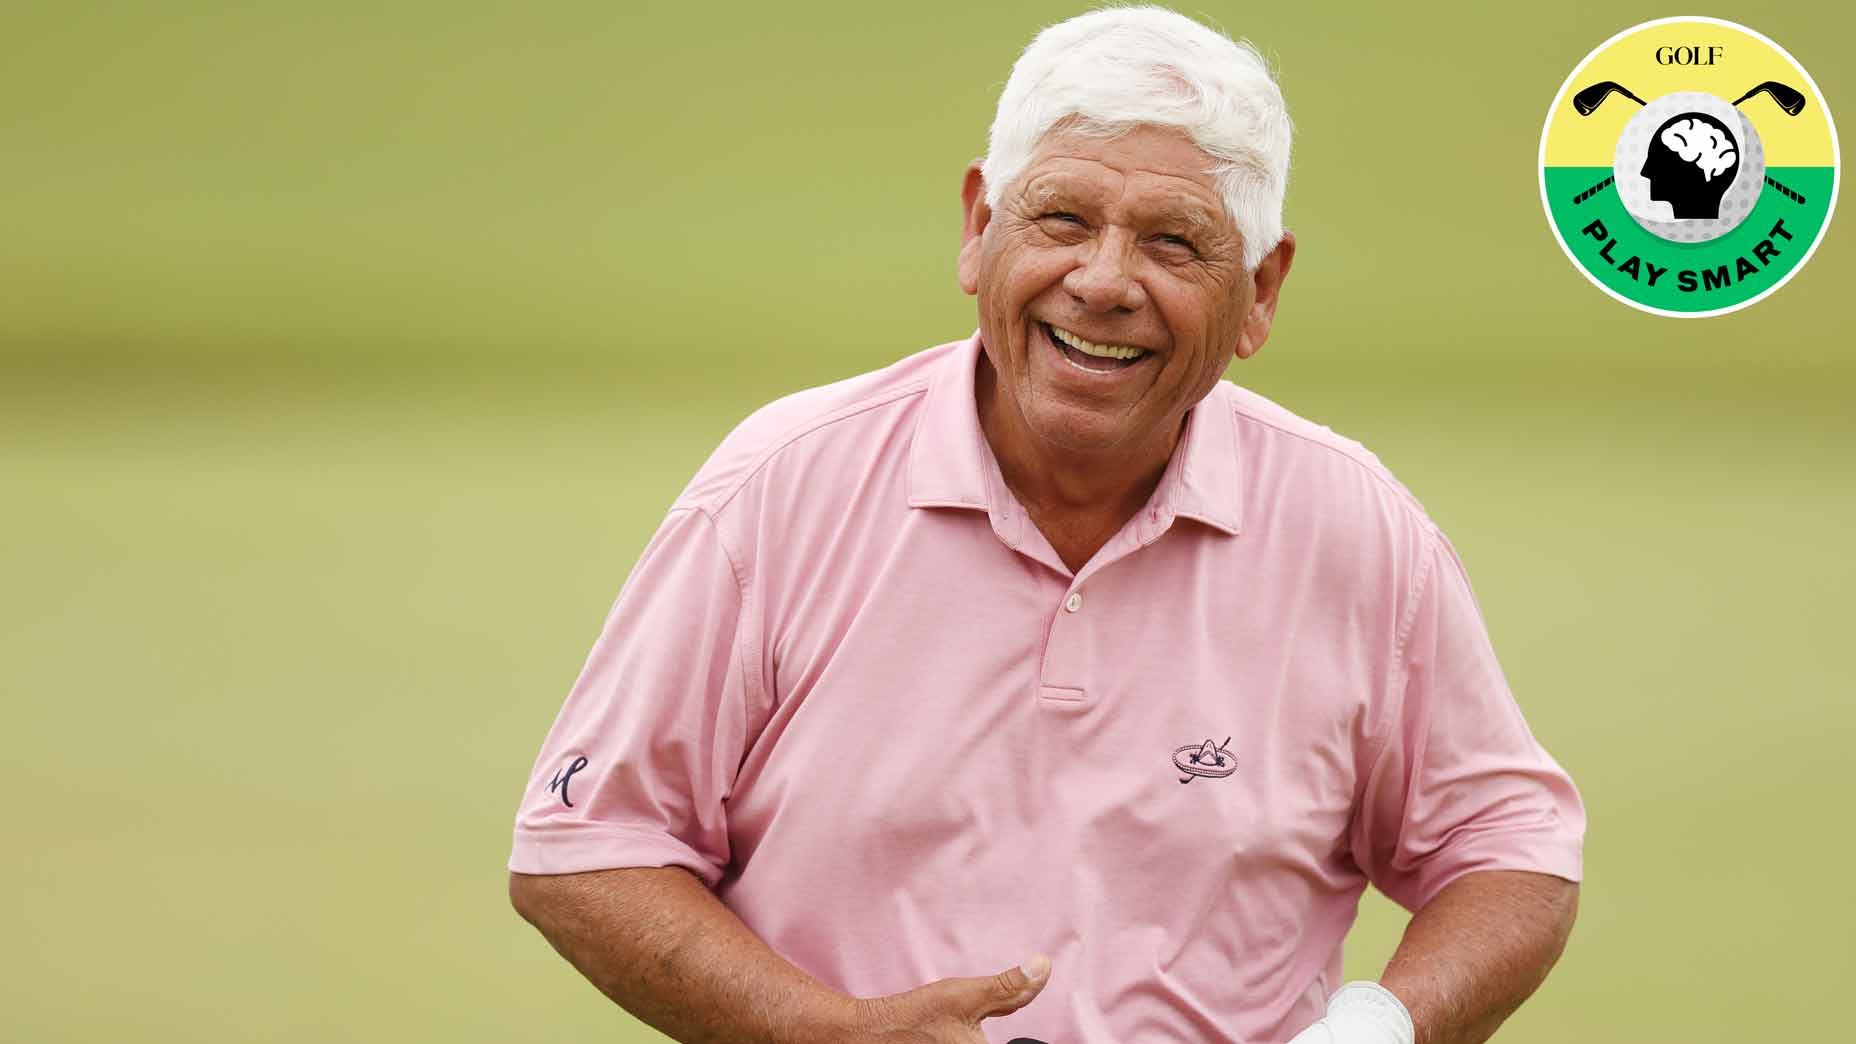 lee trevino laughs while wearing a pink shirt